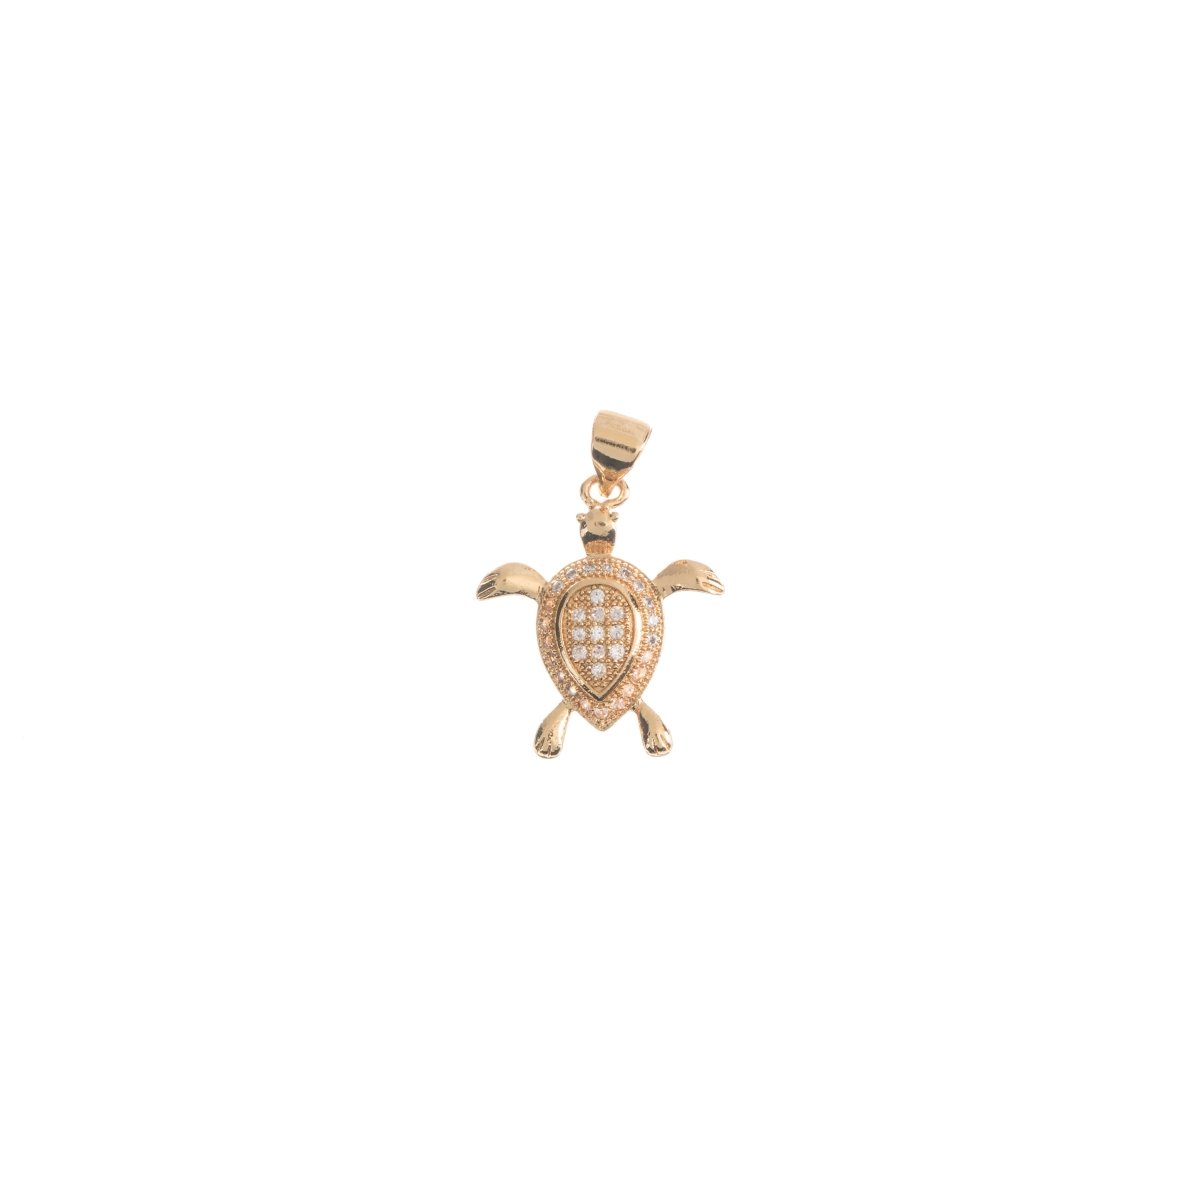 On Sale! CLEARANCE! Silver, Gold Filled Dainty Sea Turtle, Ocean Tortoise Cubic Zirconia Necklace PENDANT Charm Bead Bails Findings for Jewelry Making H-541 - DLUXCA